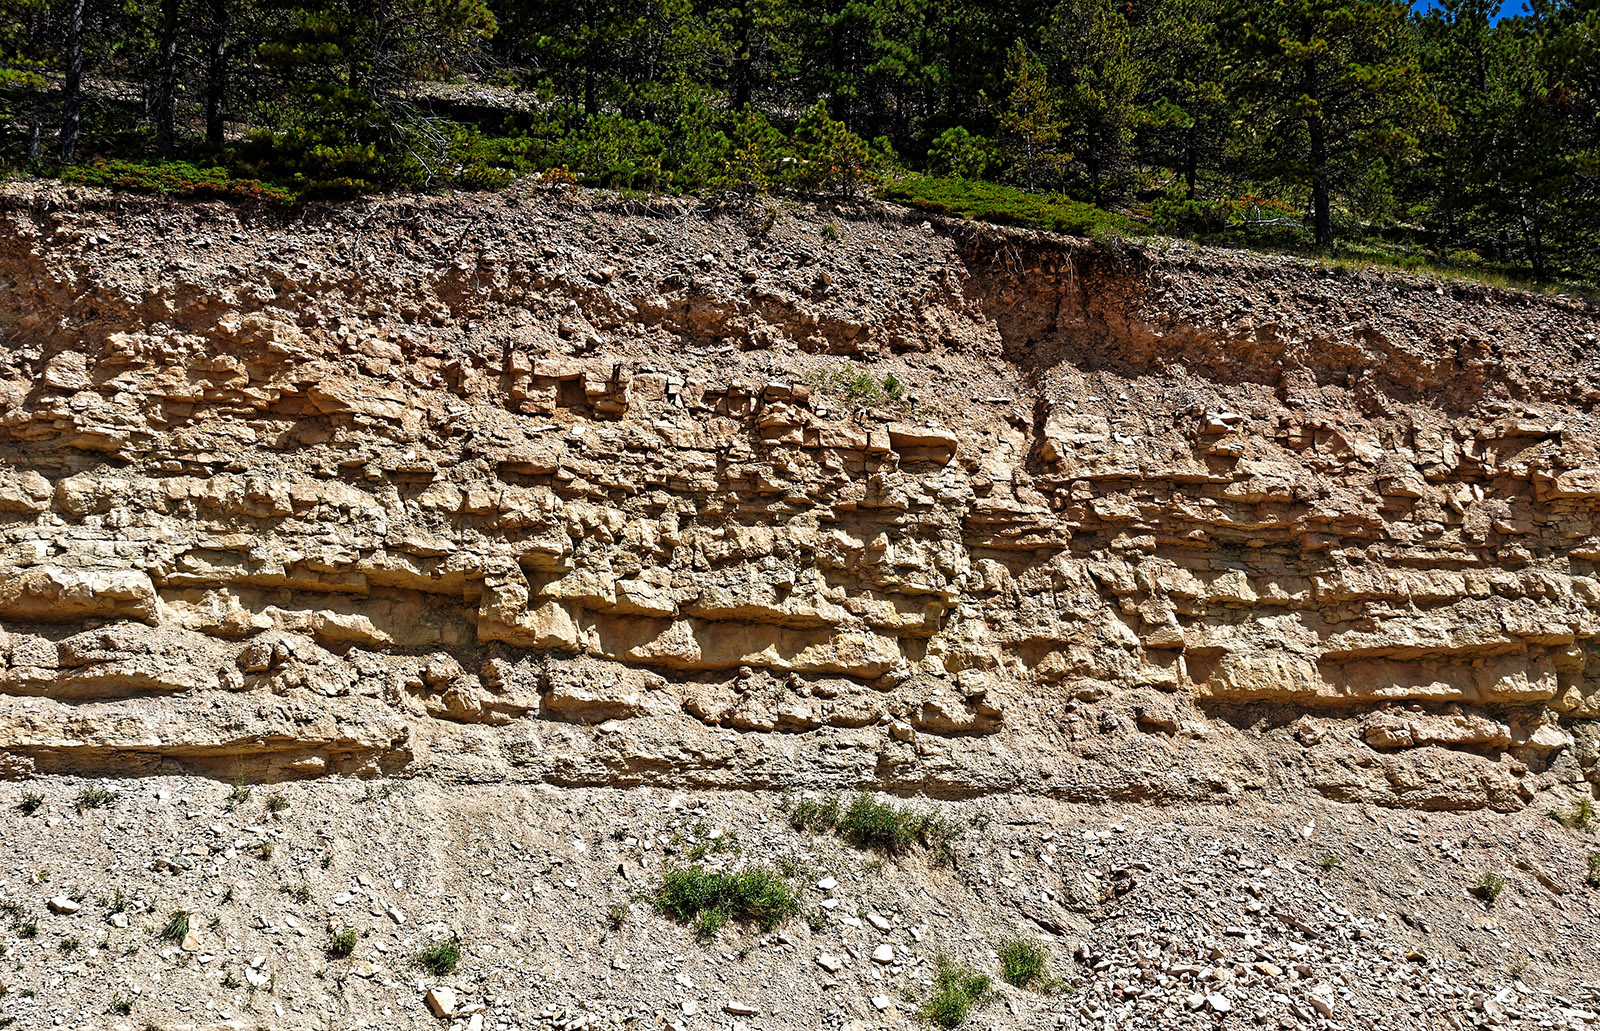 Darby formation from the Devonion period (360-410 MA) composed of predominantly of weathered limestone and dolomite.